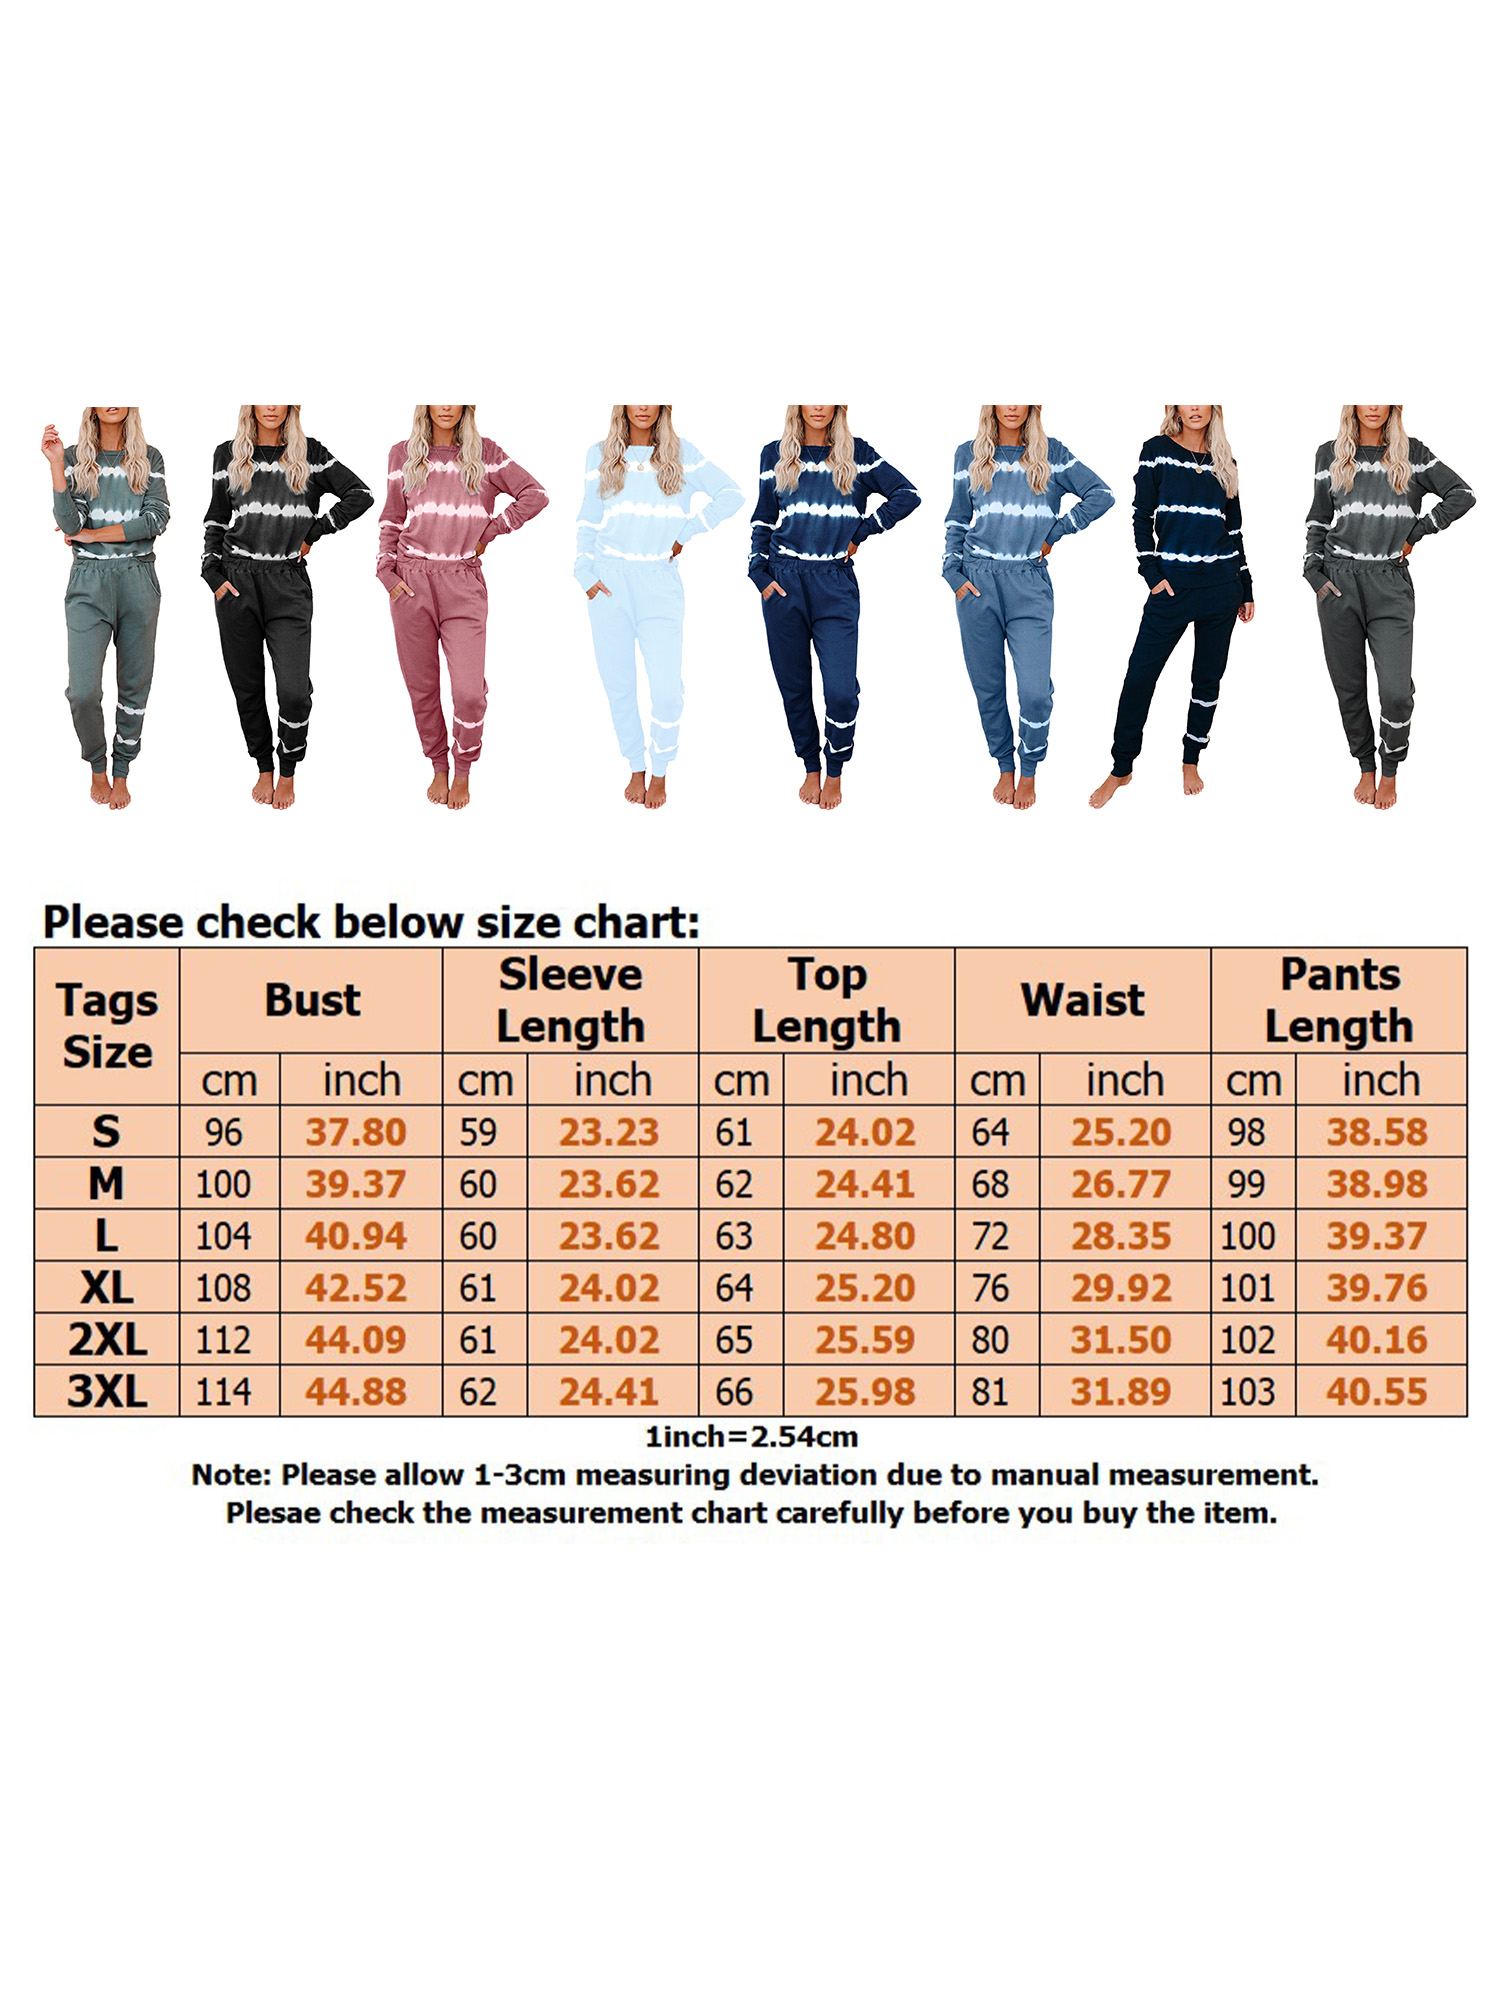 UKAP Long Sleeve Stripe Tops Casual Sweatpants Loungwear Sets for Women Mid Waist Sports Suit Workout Blouse Tracksuit Jumpsuit for Lady Activewear Outfits - image 2 of 2